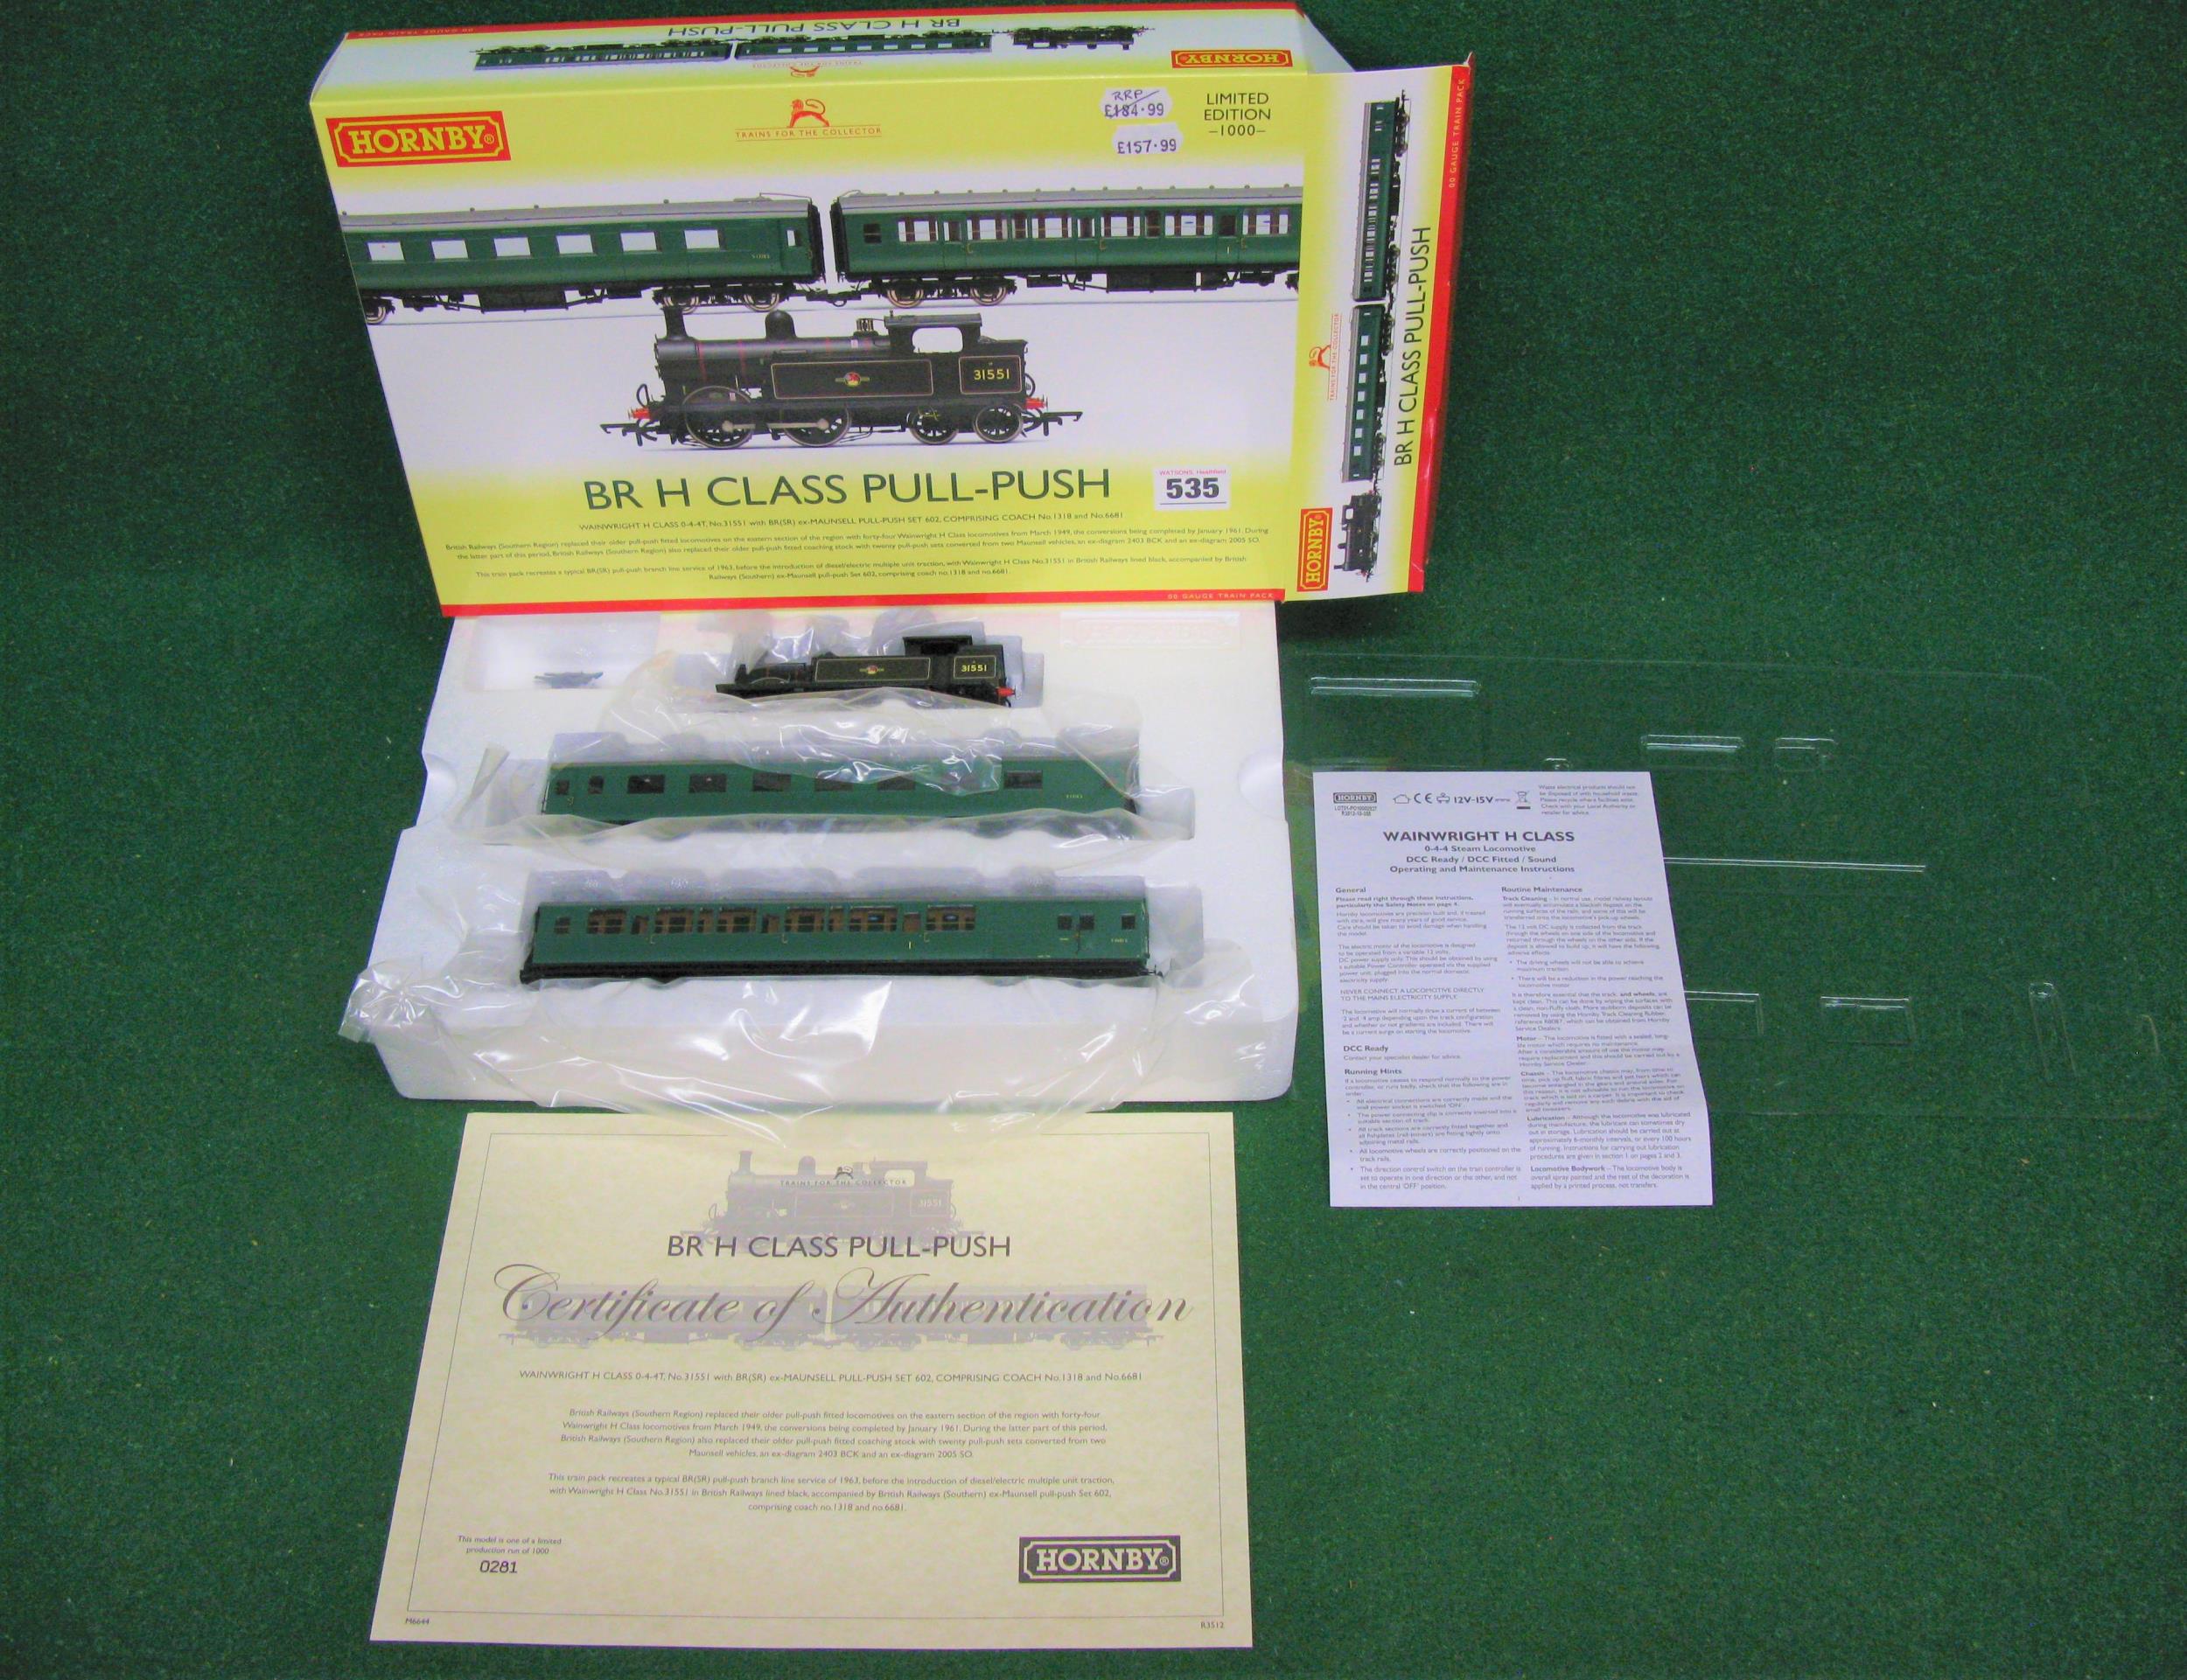 Unused Boxed Hornby OO BR H Class Pull-Push set, Limited Edition 281/1000 containing 0-4-4T No.